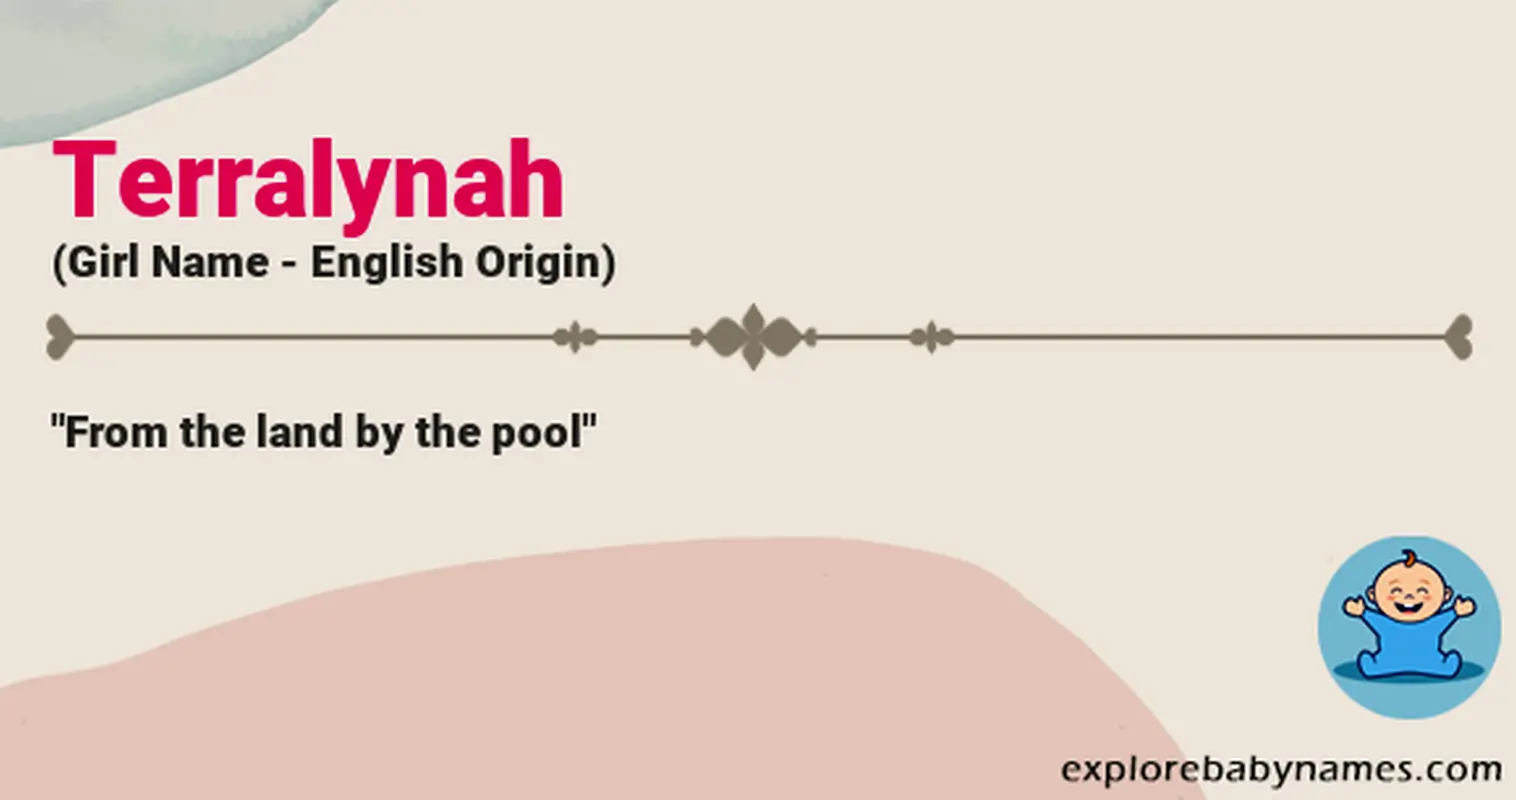 Meaning of Terralynah